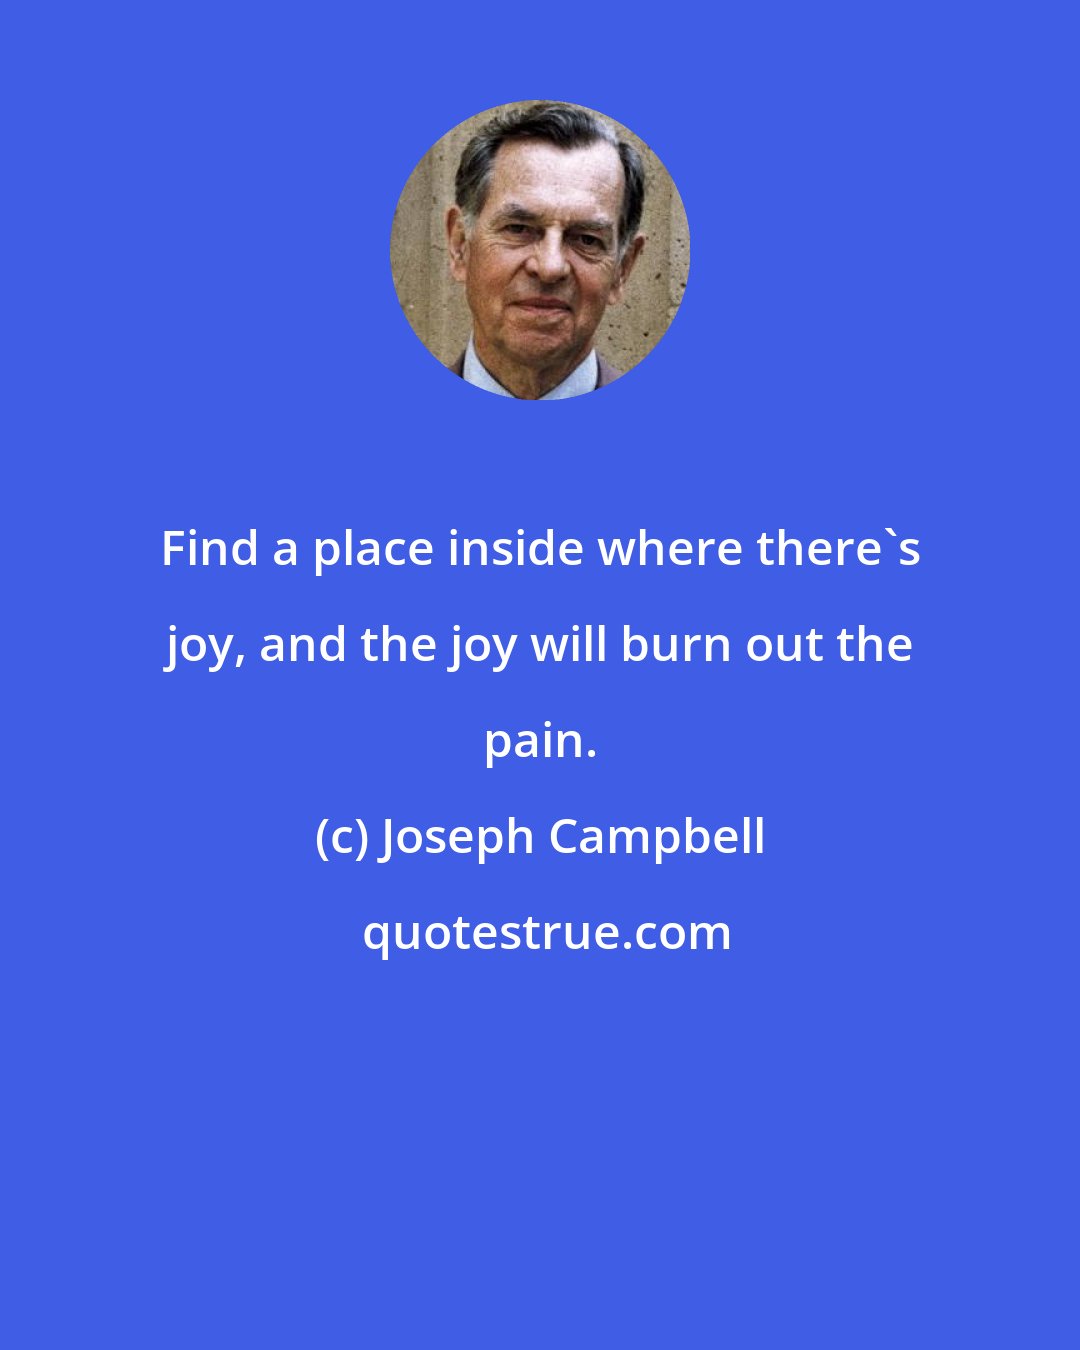 Joseph Campbell: Find a place inside where there's joy, and the joy will burn out the pain.